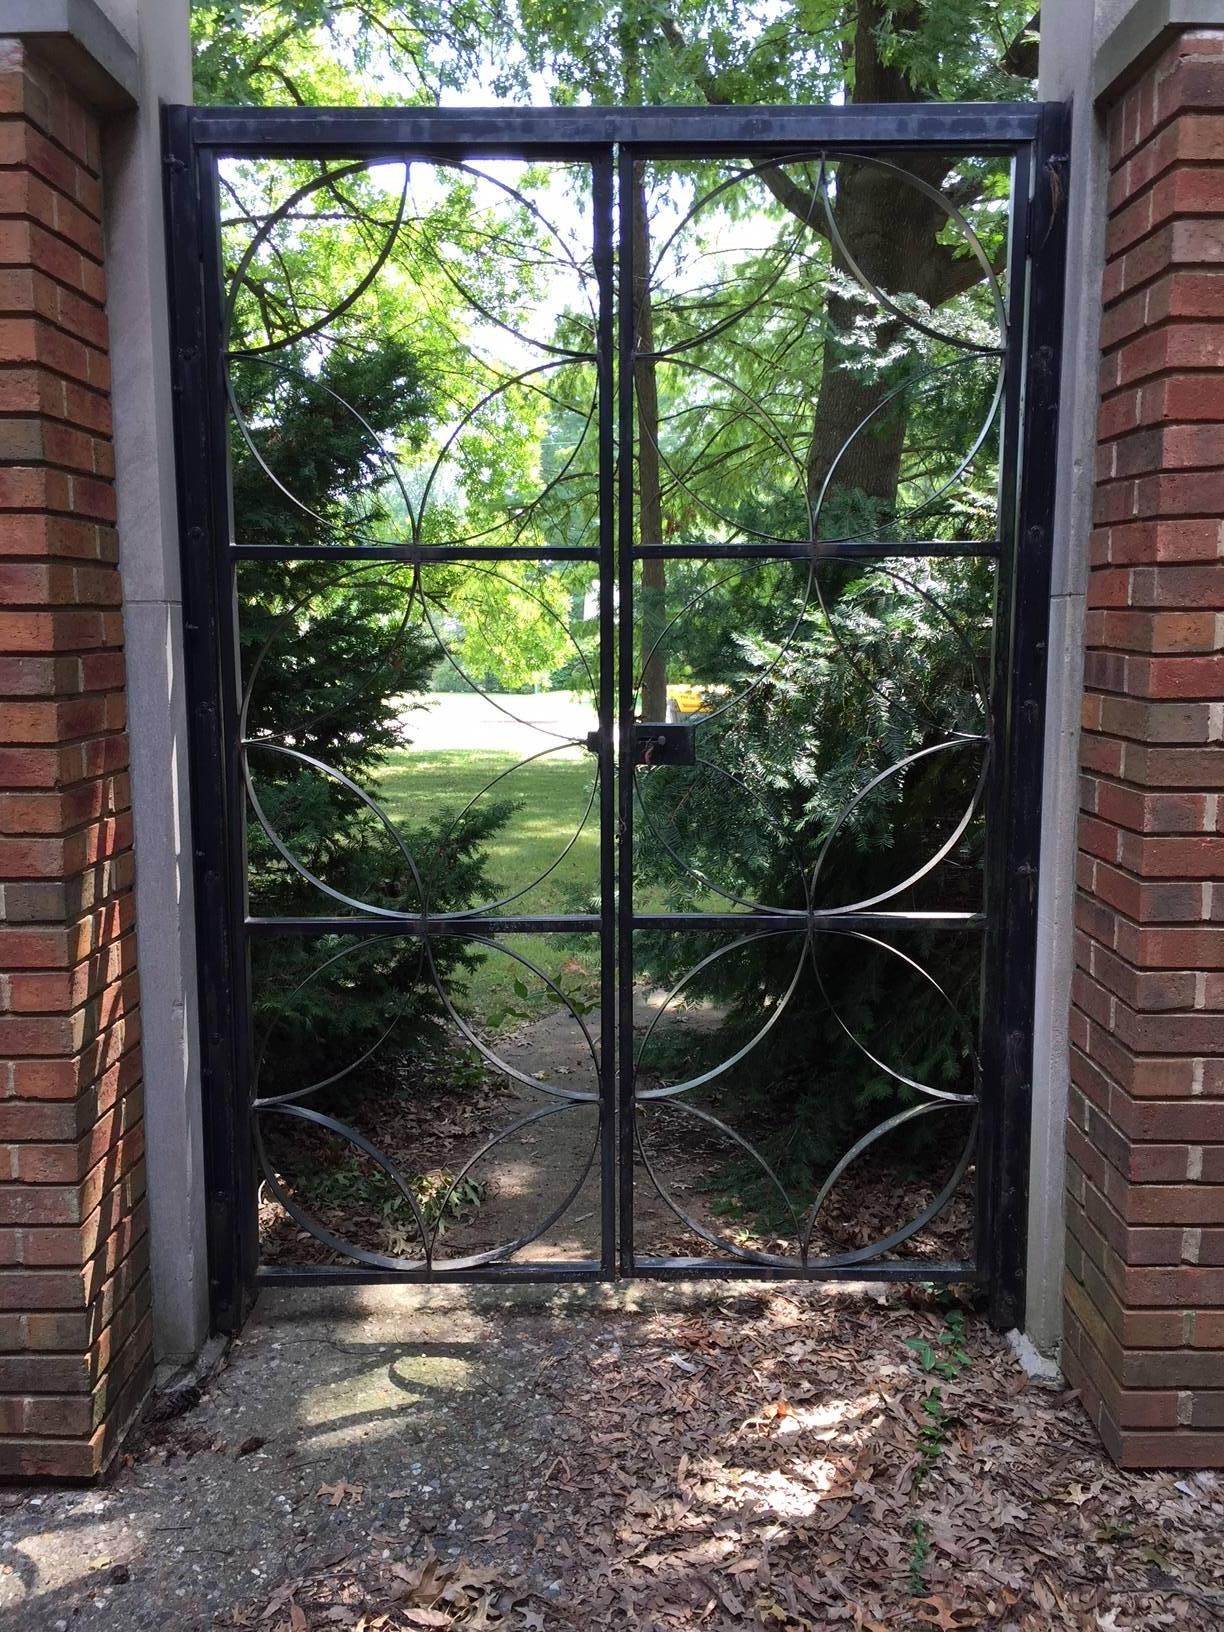 Custom garden gate designed by architect R.L. Fischer & Associates for the St. Matthews Episcopal Church in Warson Woods a suburb of St. Louis, circa 1959. Unfortunately this midcentury gem was recently demolished. This is a well made heavy duty